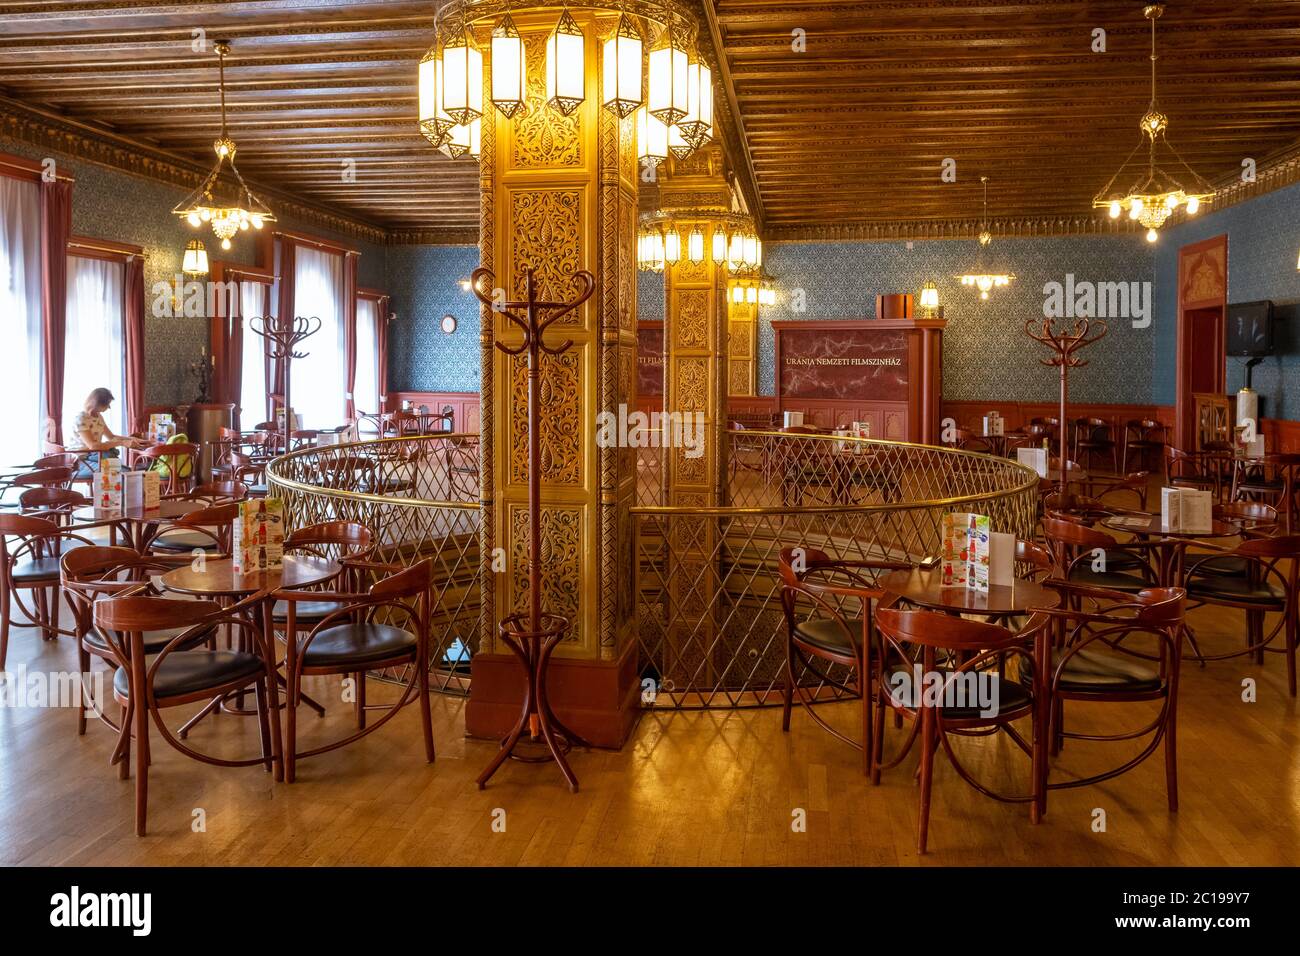 Budapest, Hungary - August 25, 2019: Interior of Bar Urania in Urania National Film Theatre built in 1890 in Budapest. Stock Photo